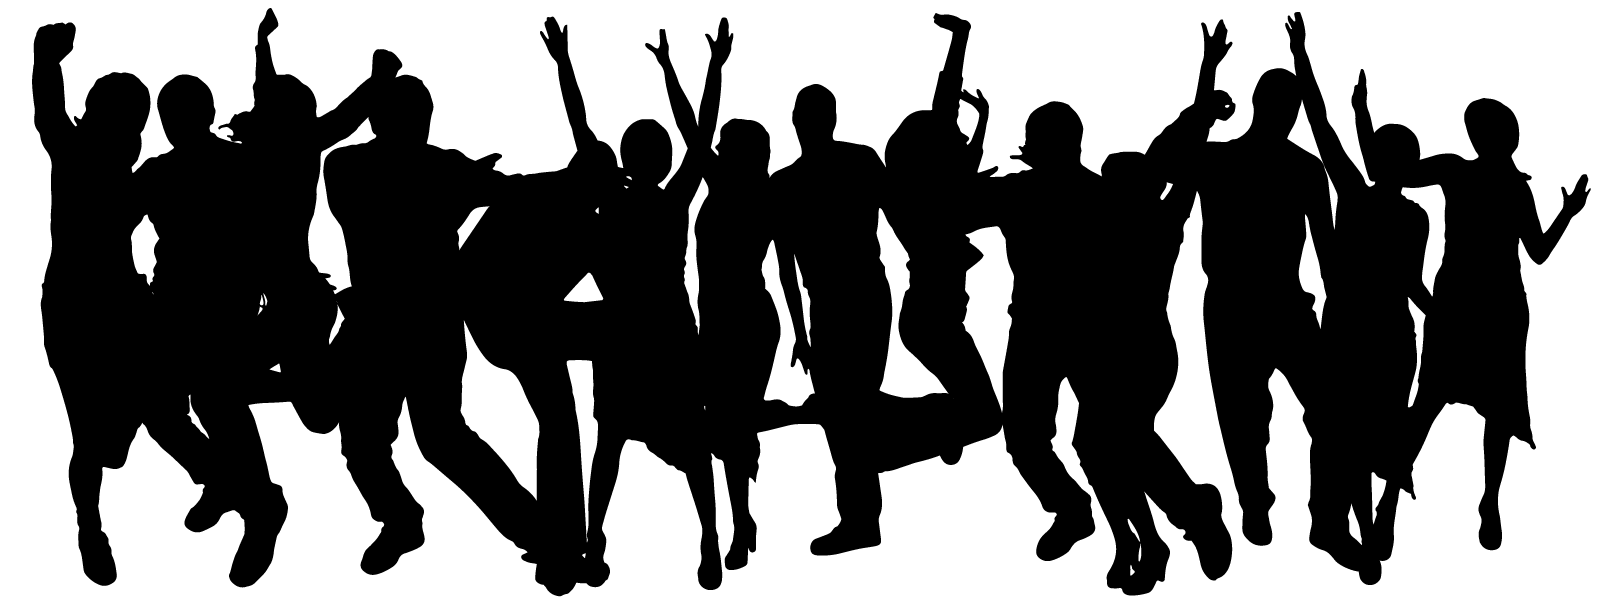 Dance could change the. Humans clipart dancing